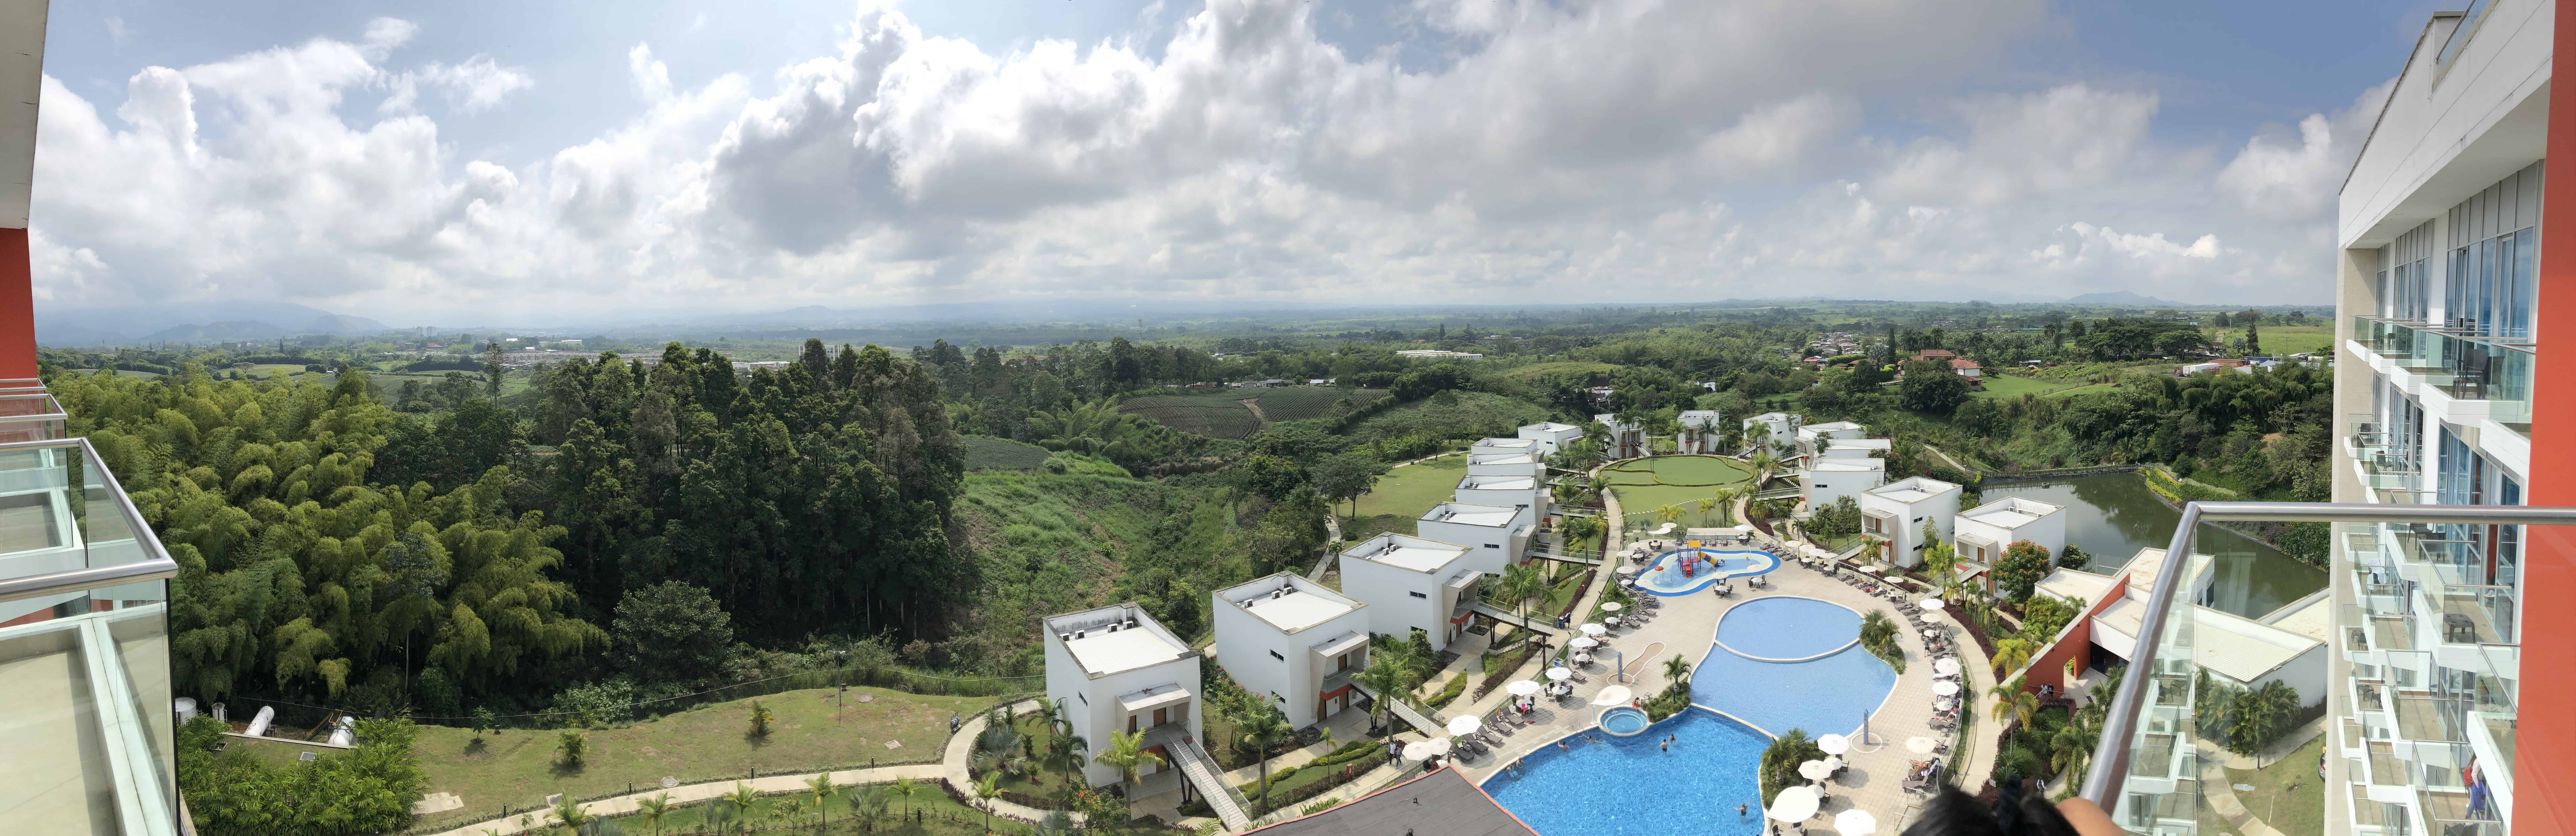 View from the 7th floor at Sonesta Hotel Pereira, Colombia